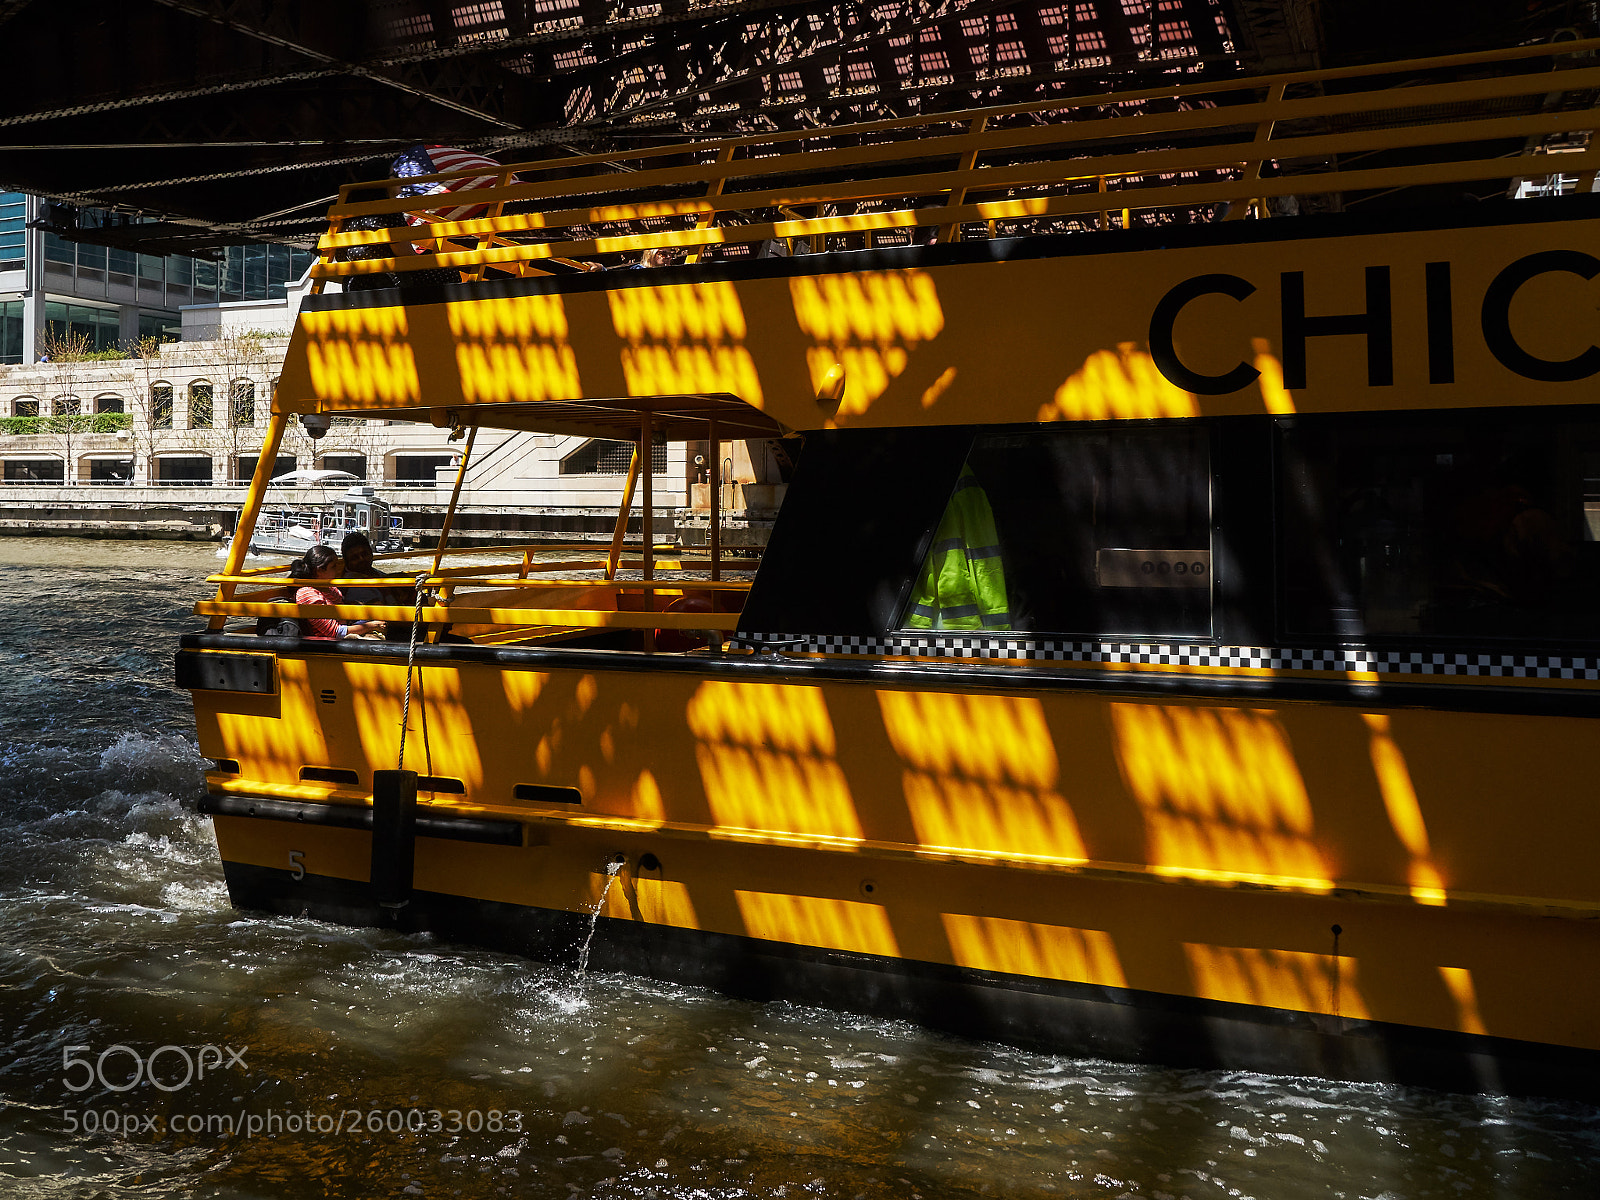 Sony a6300 sample photo. Chicago water taxi photography